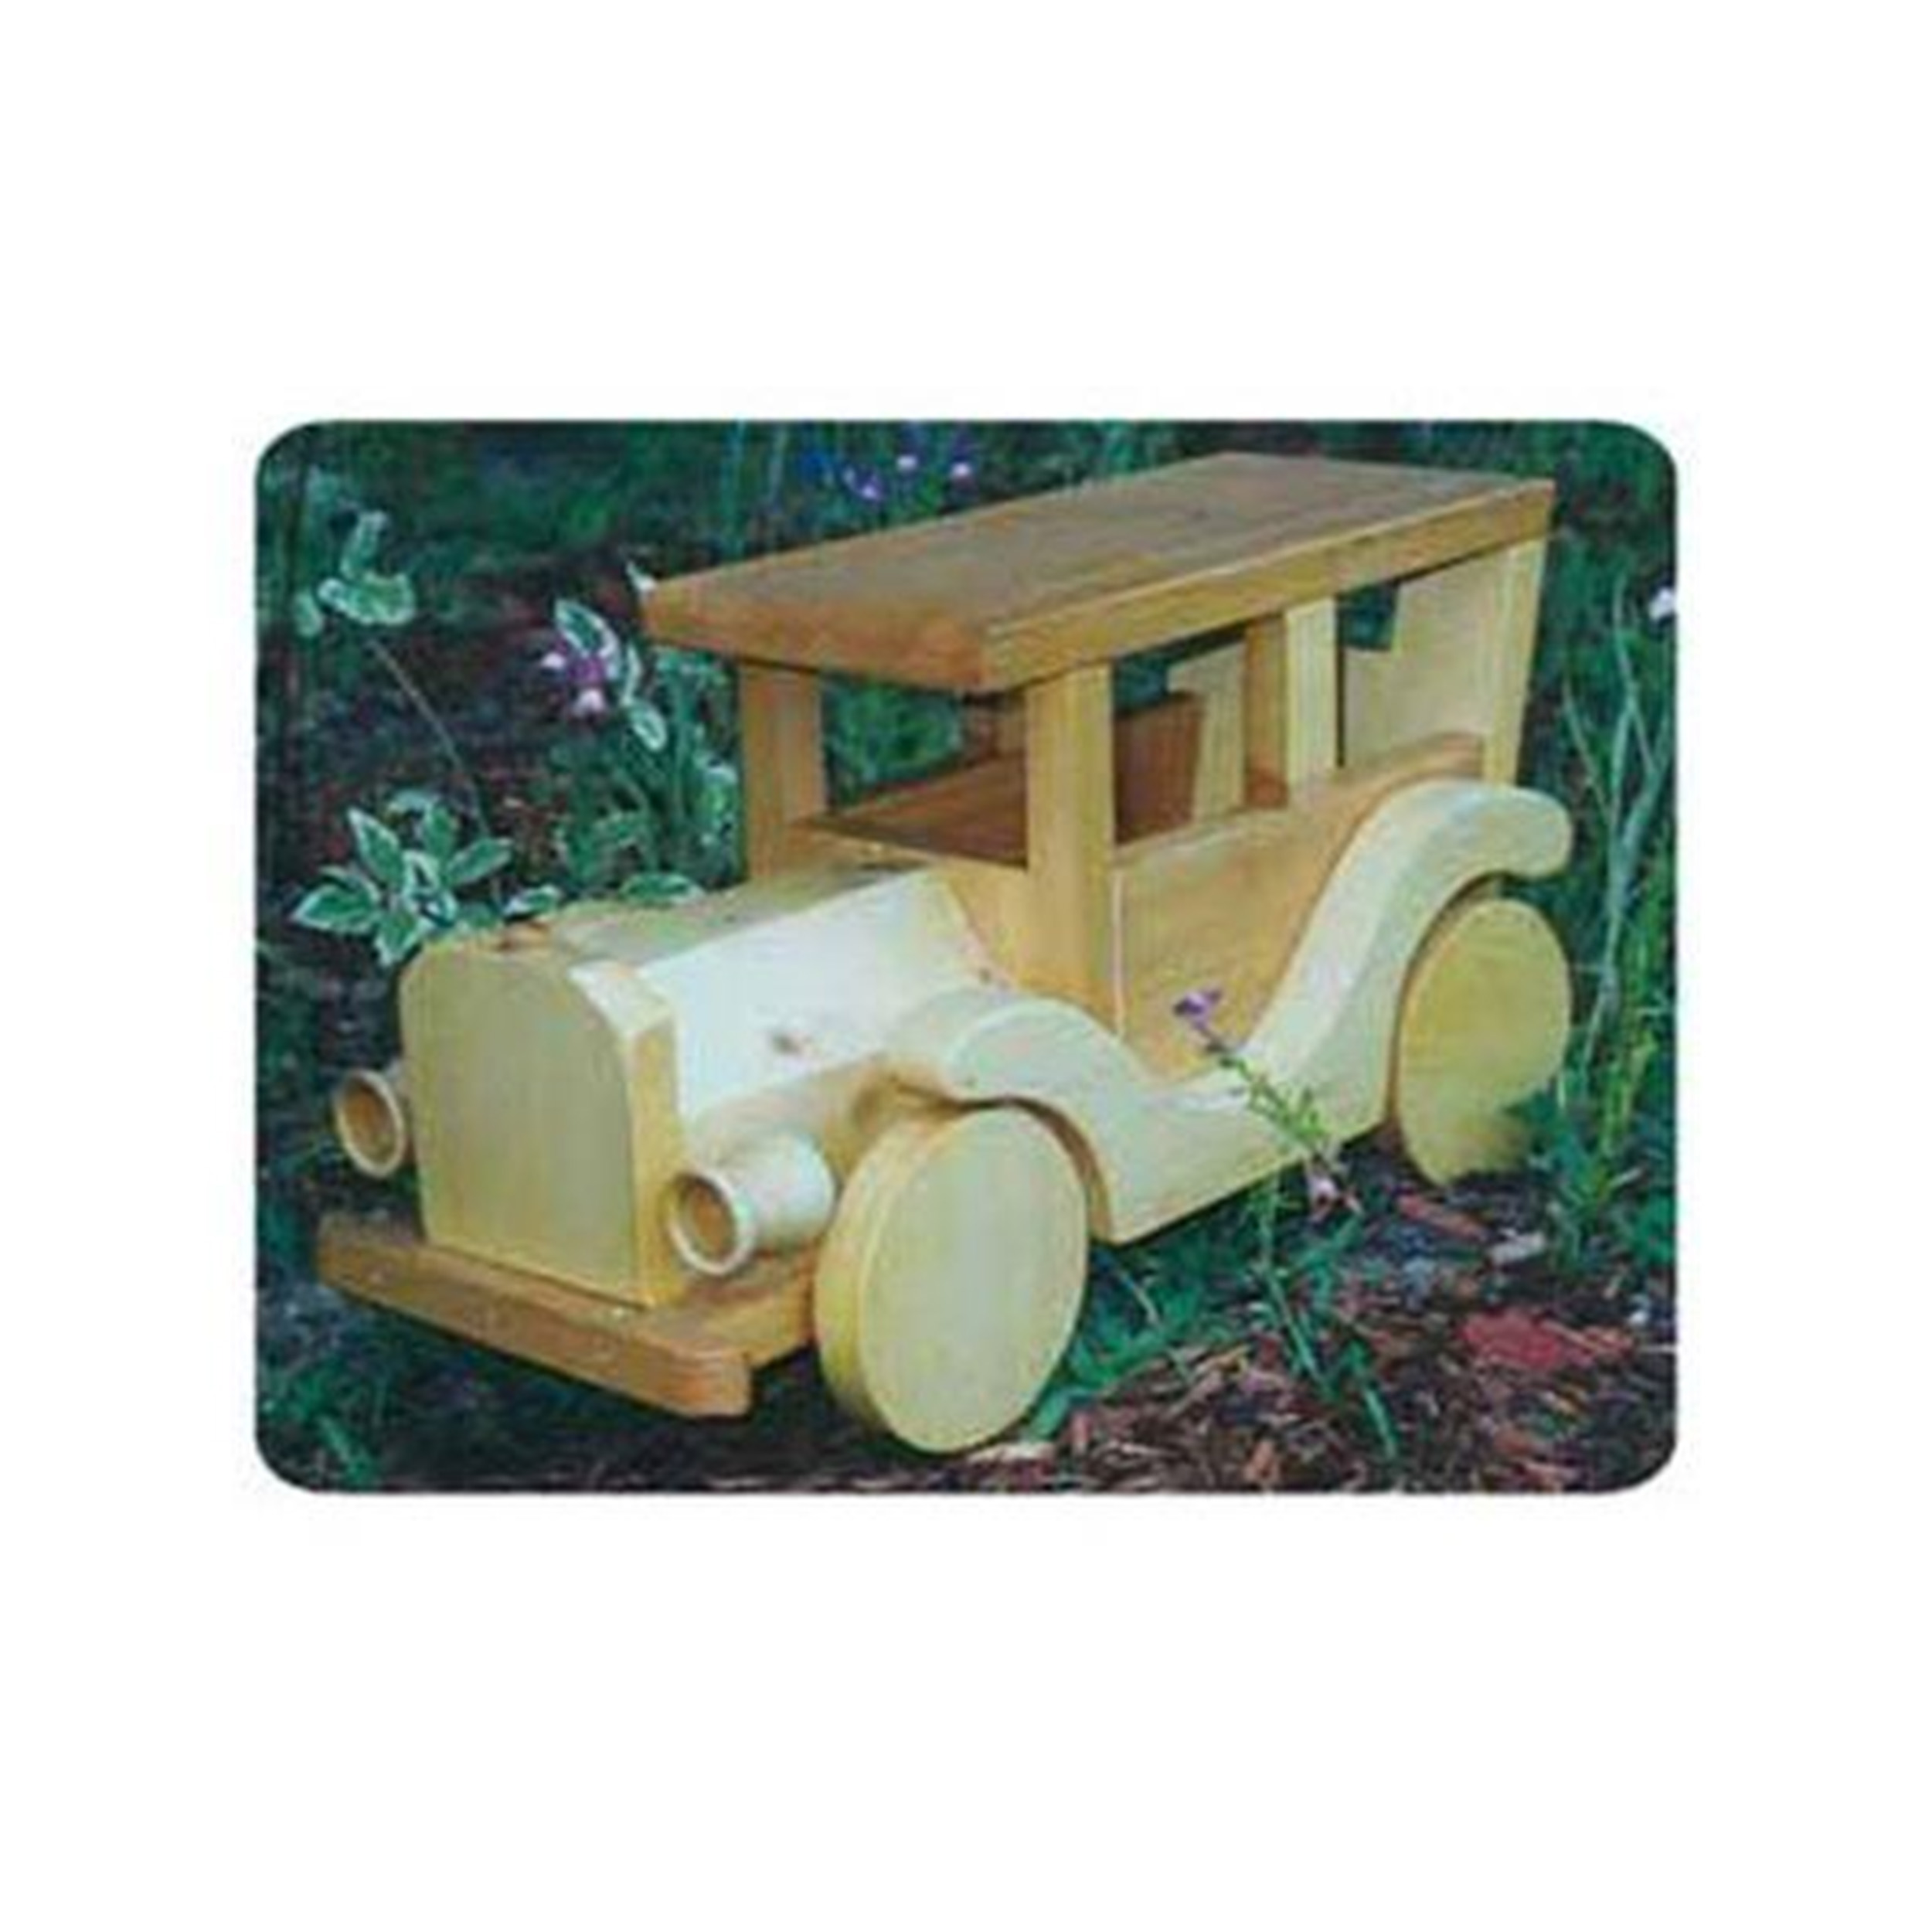 Woodworking Project Paper Plan To Build Large Antique Car